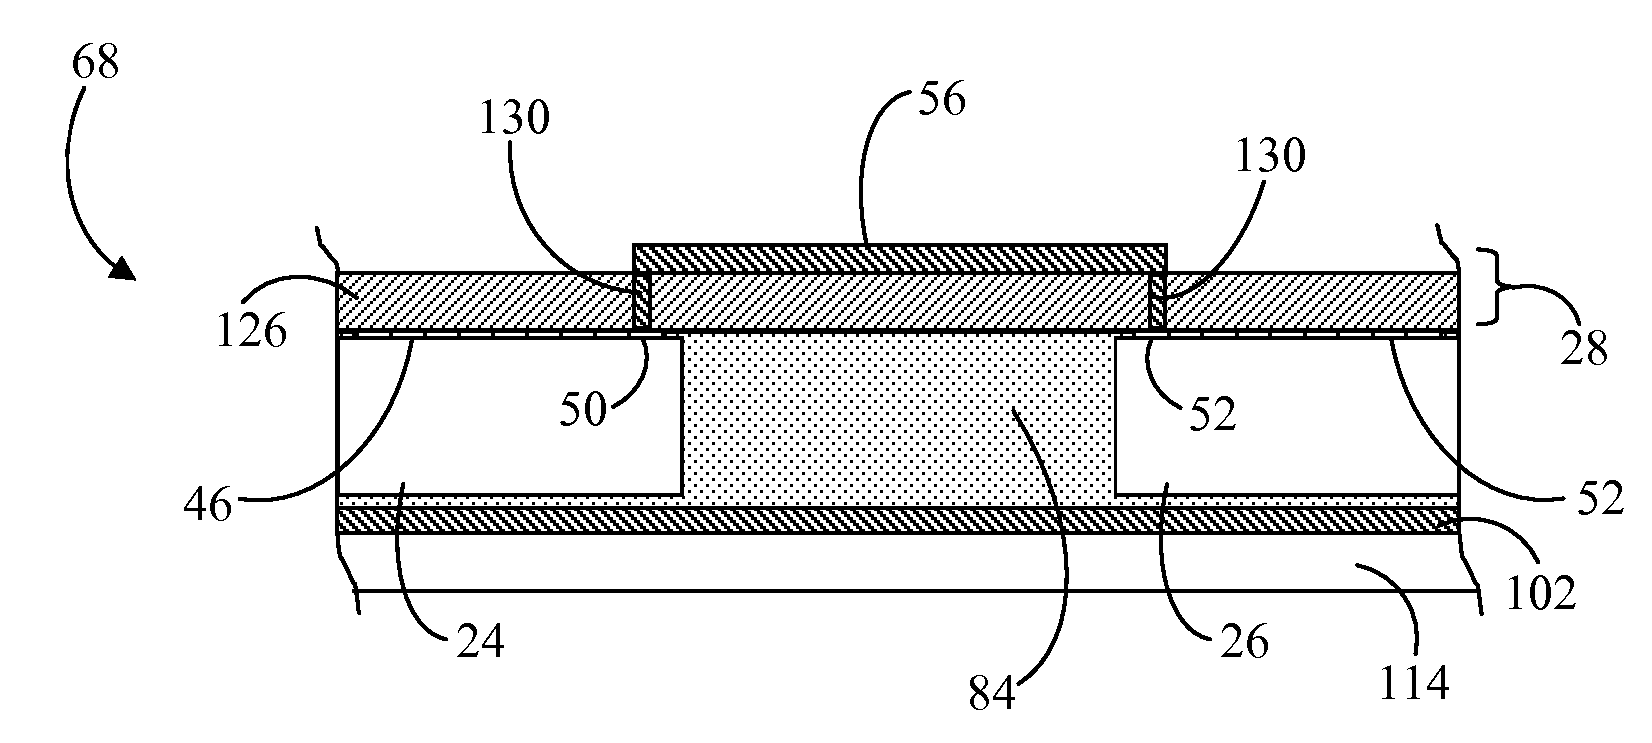 Integrated circuit module and method of packaging same